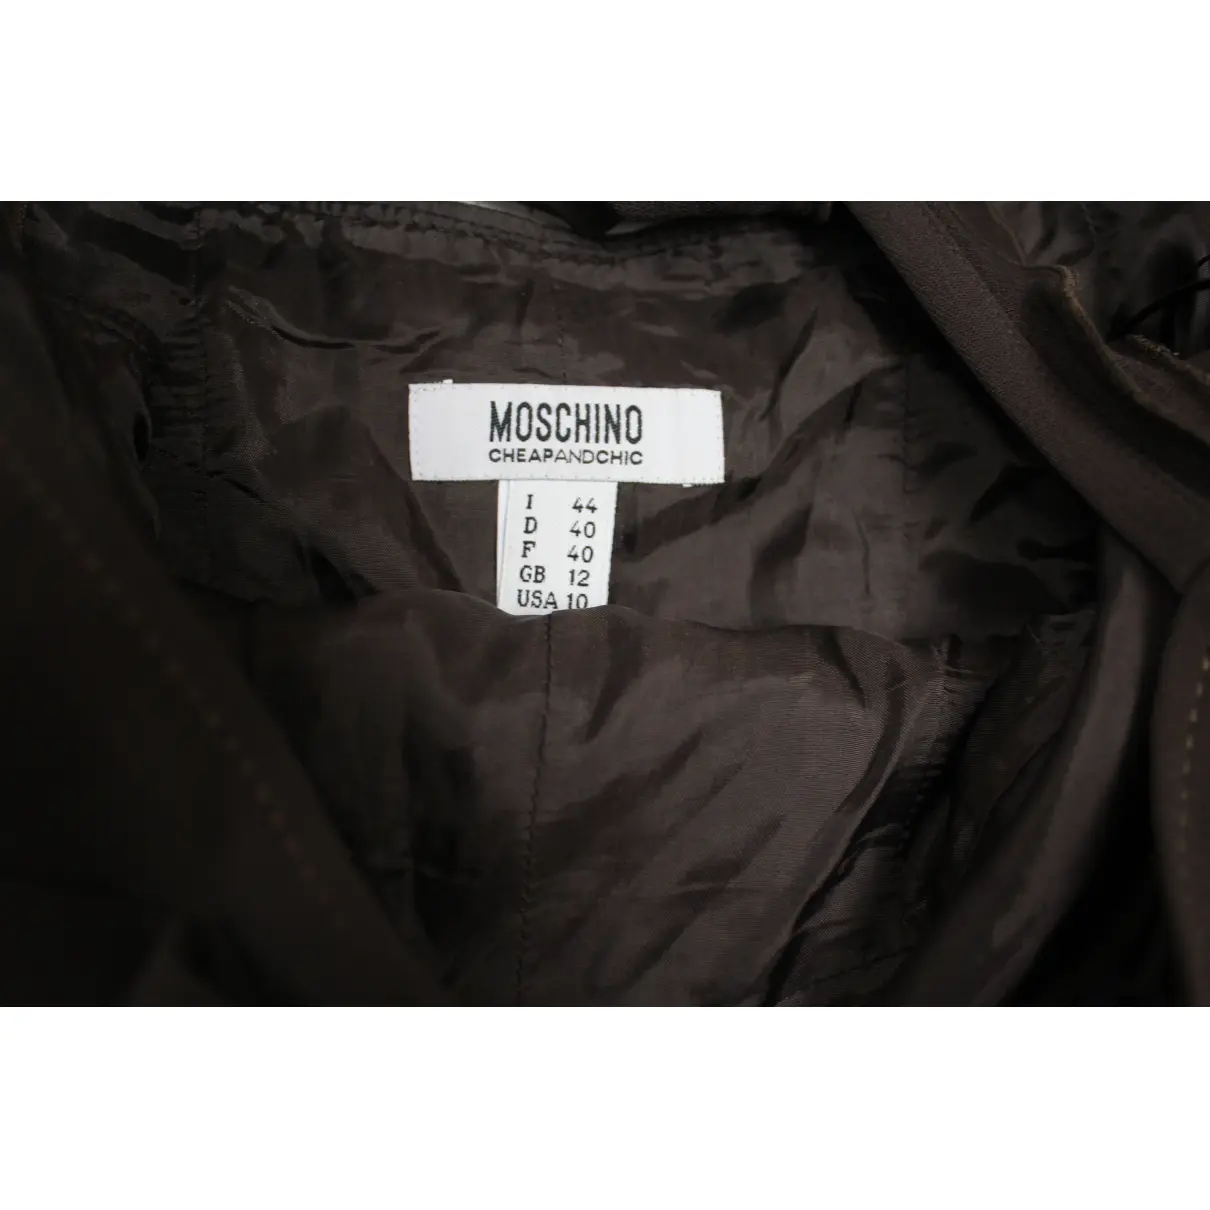 Buy Moschino Cheap And Chic Mid-length dress online